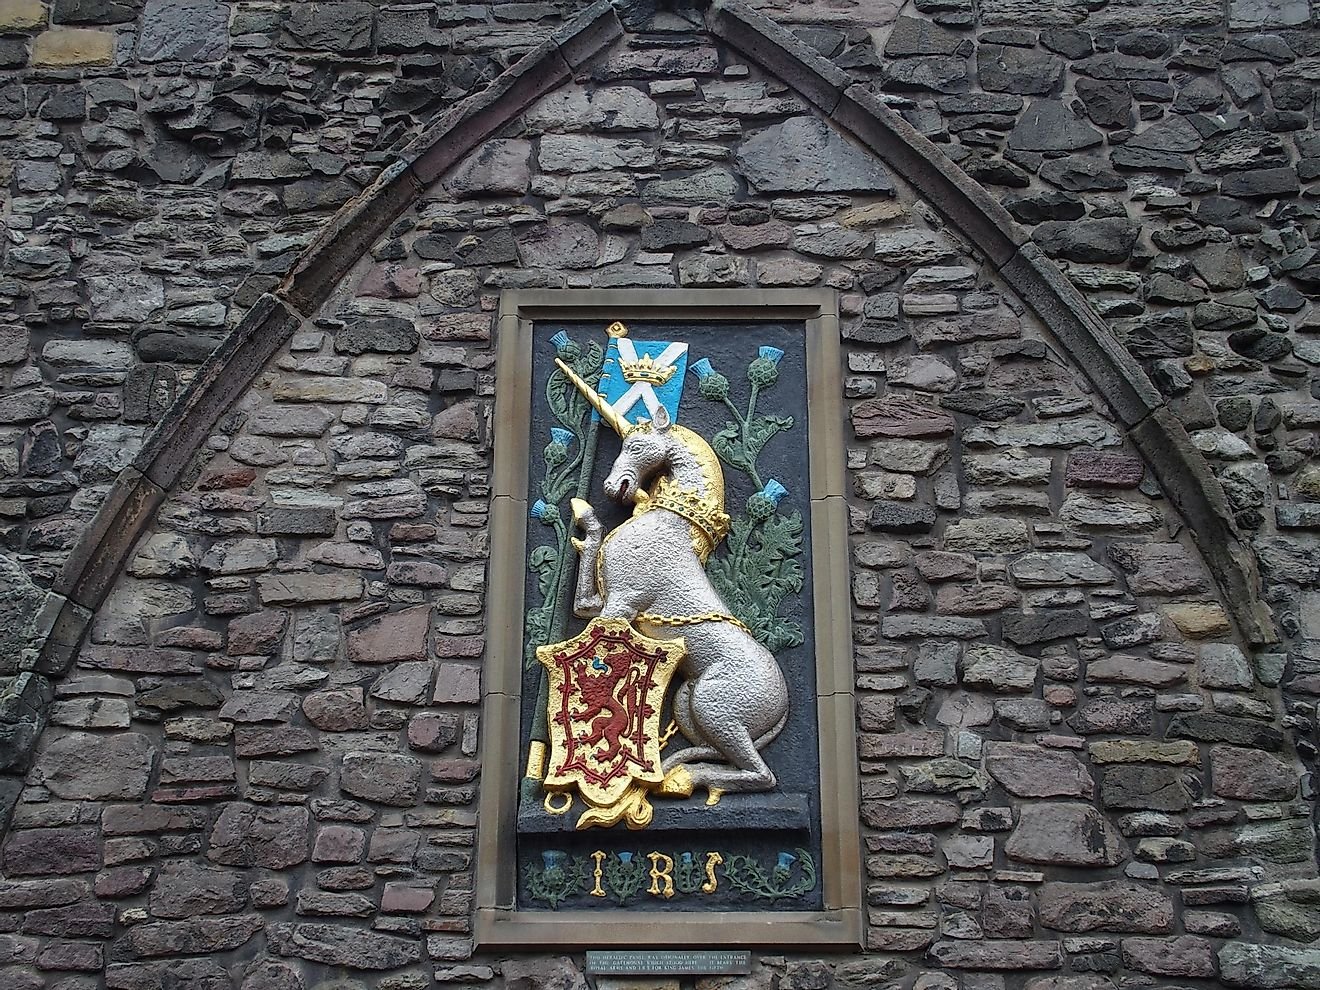 Did You Know That Scotland’s National Animal Is The Unicorn?